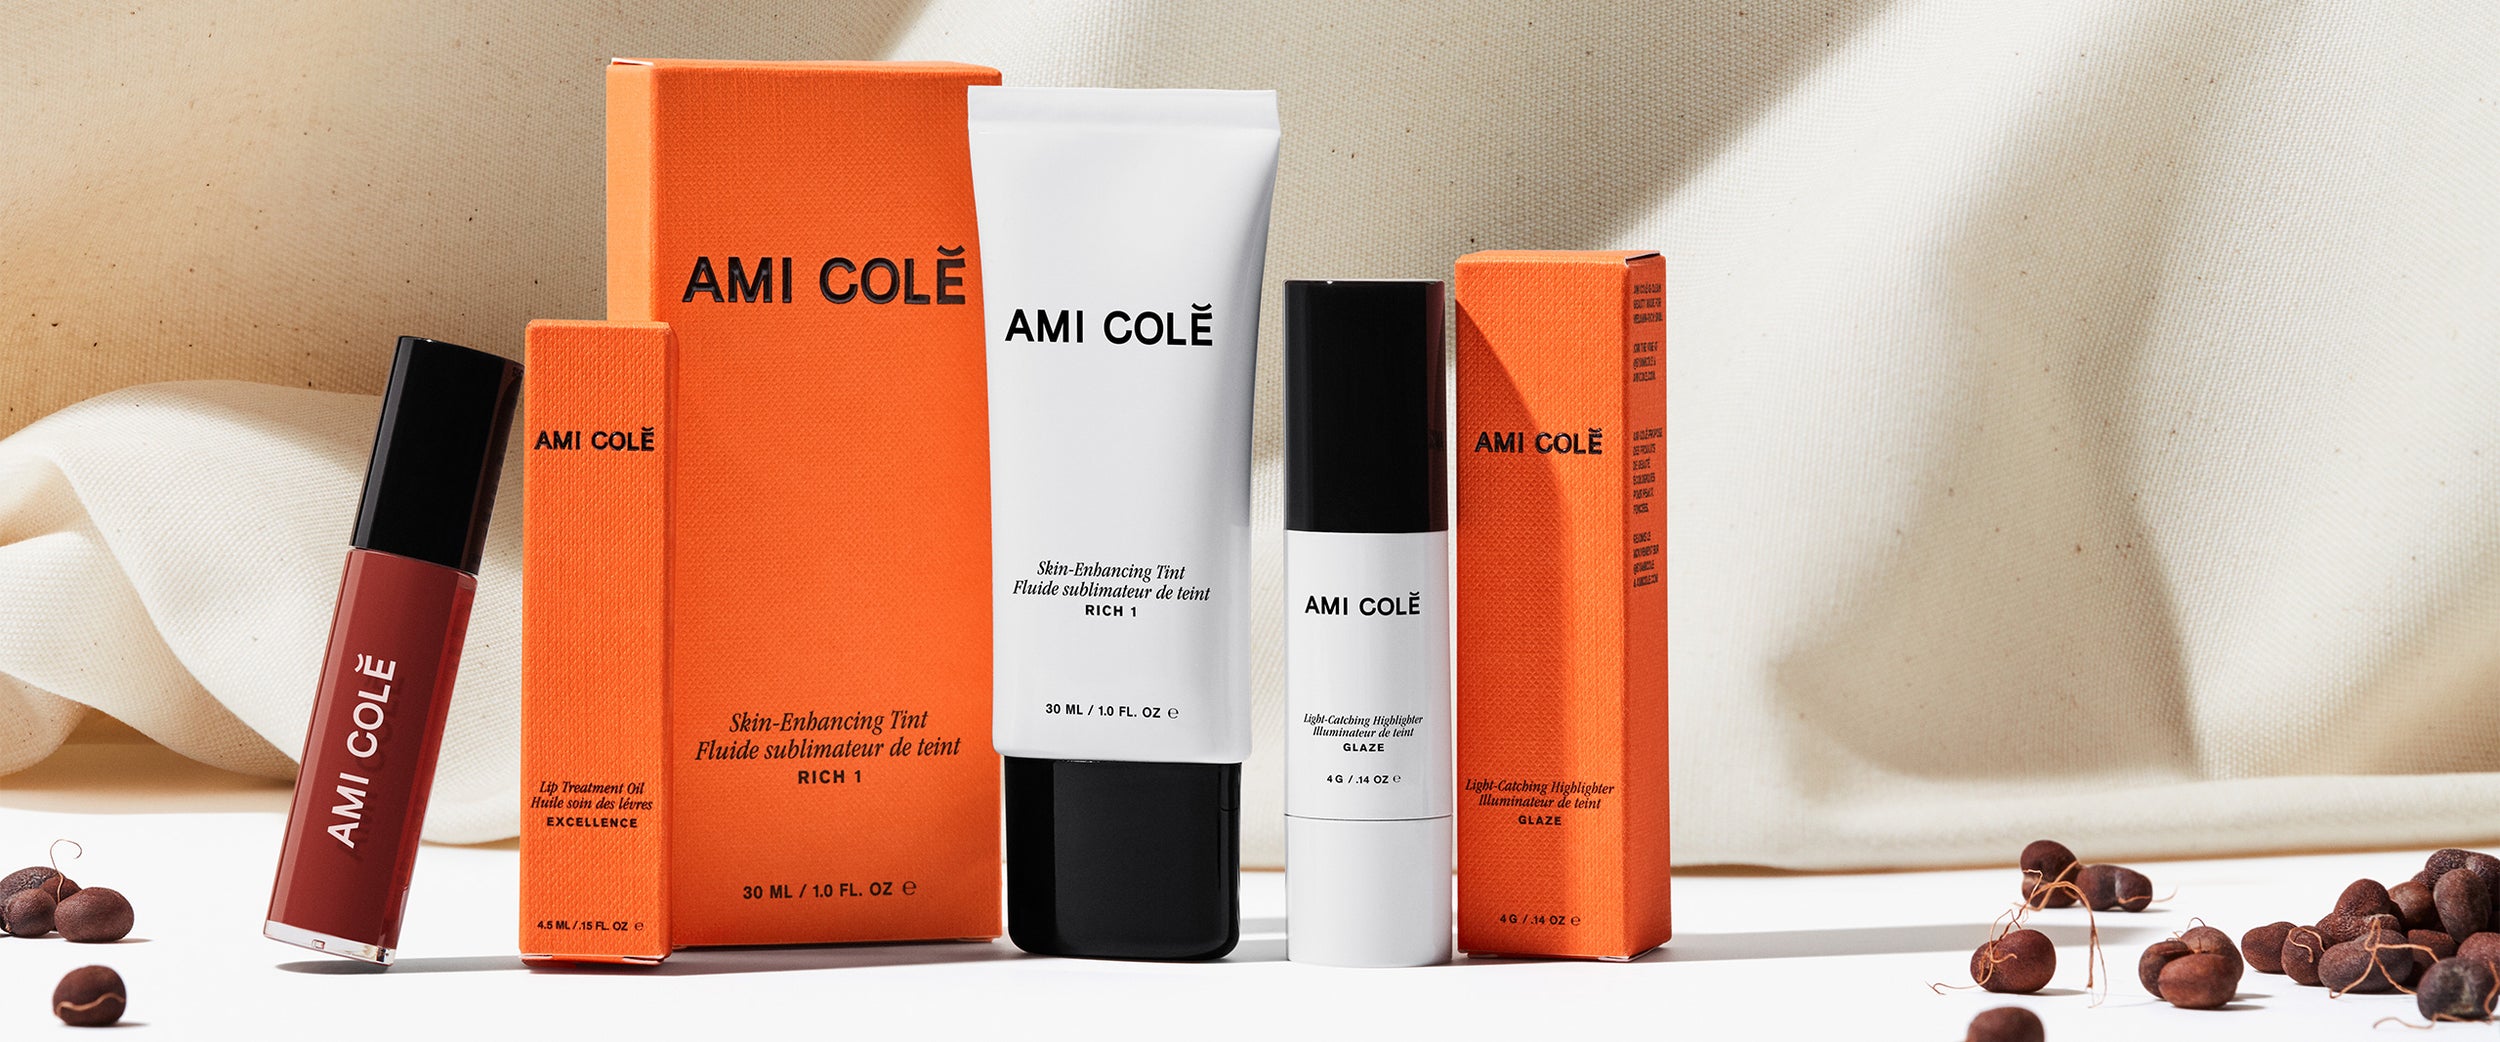 Ami Colé products